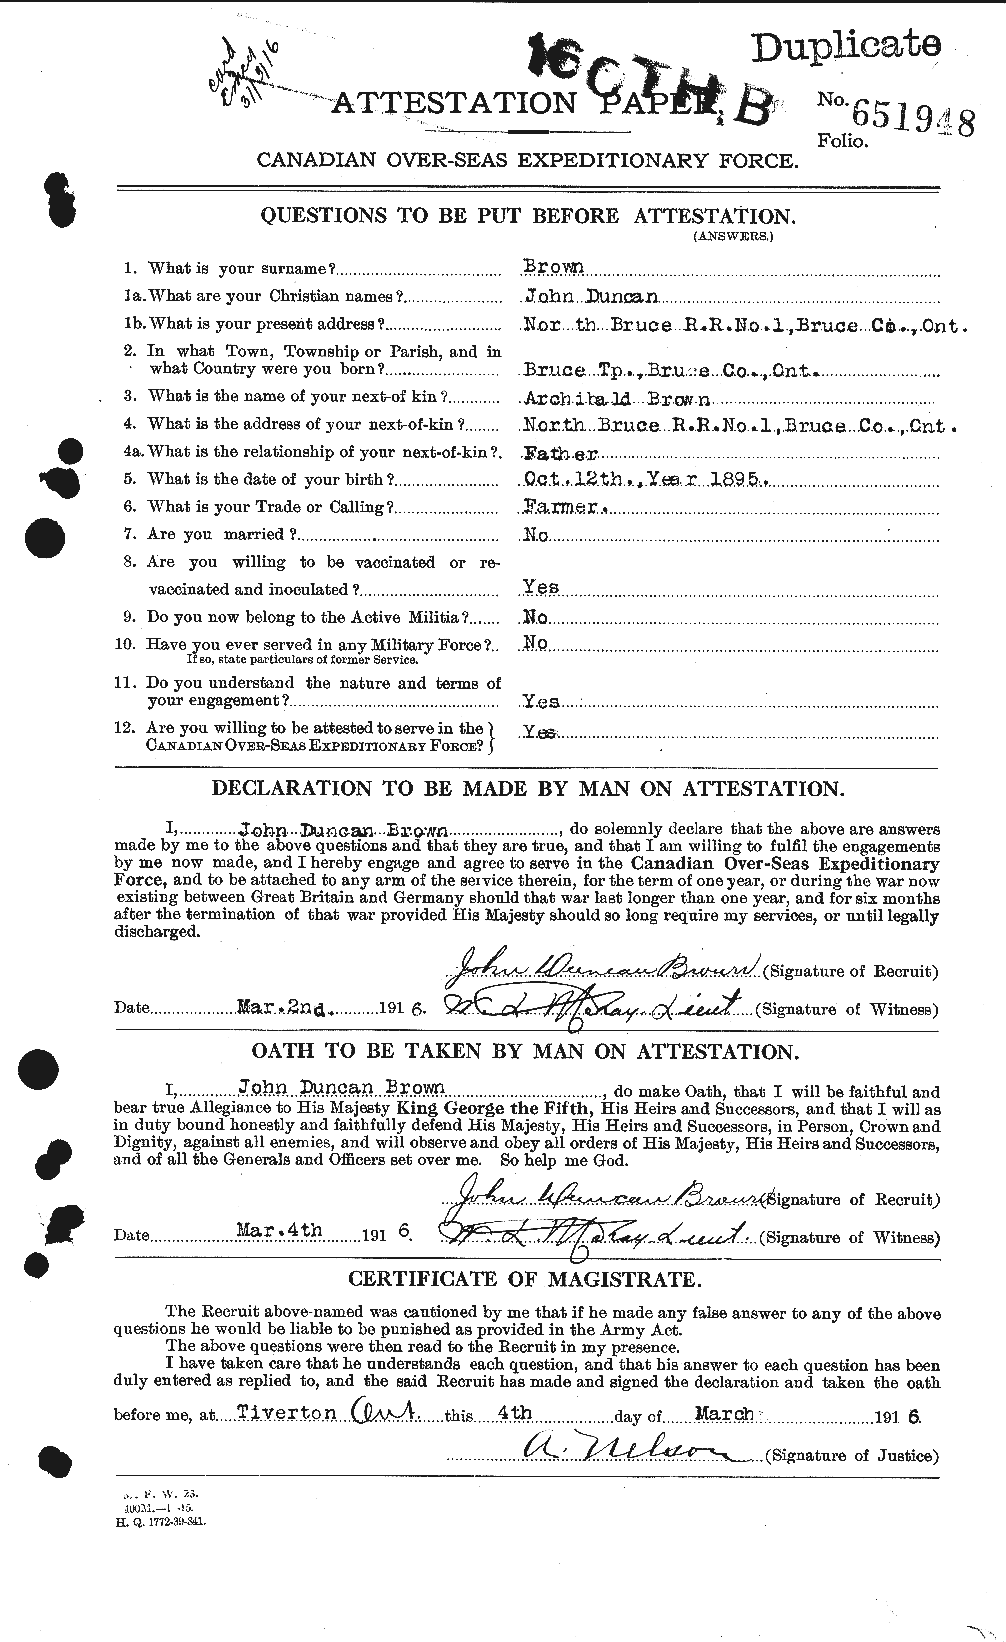 Personnel Records of the First World War - CEF 264587a